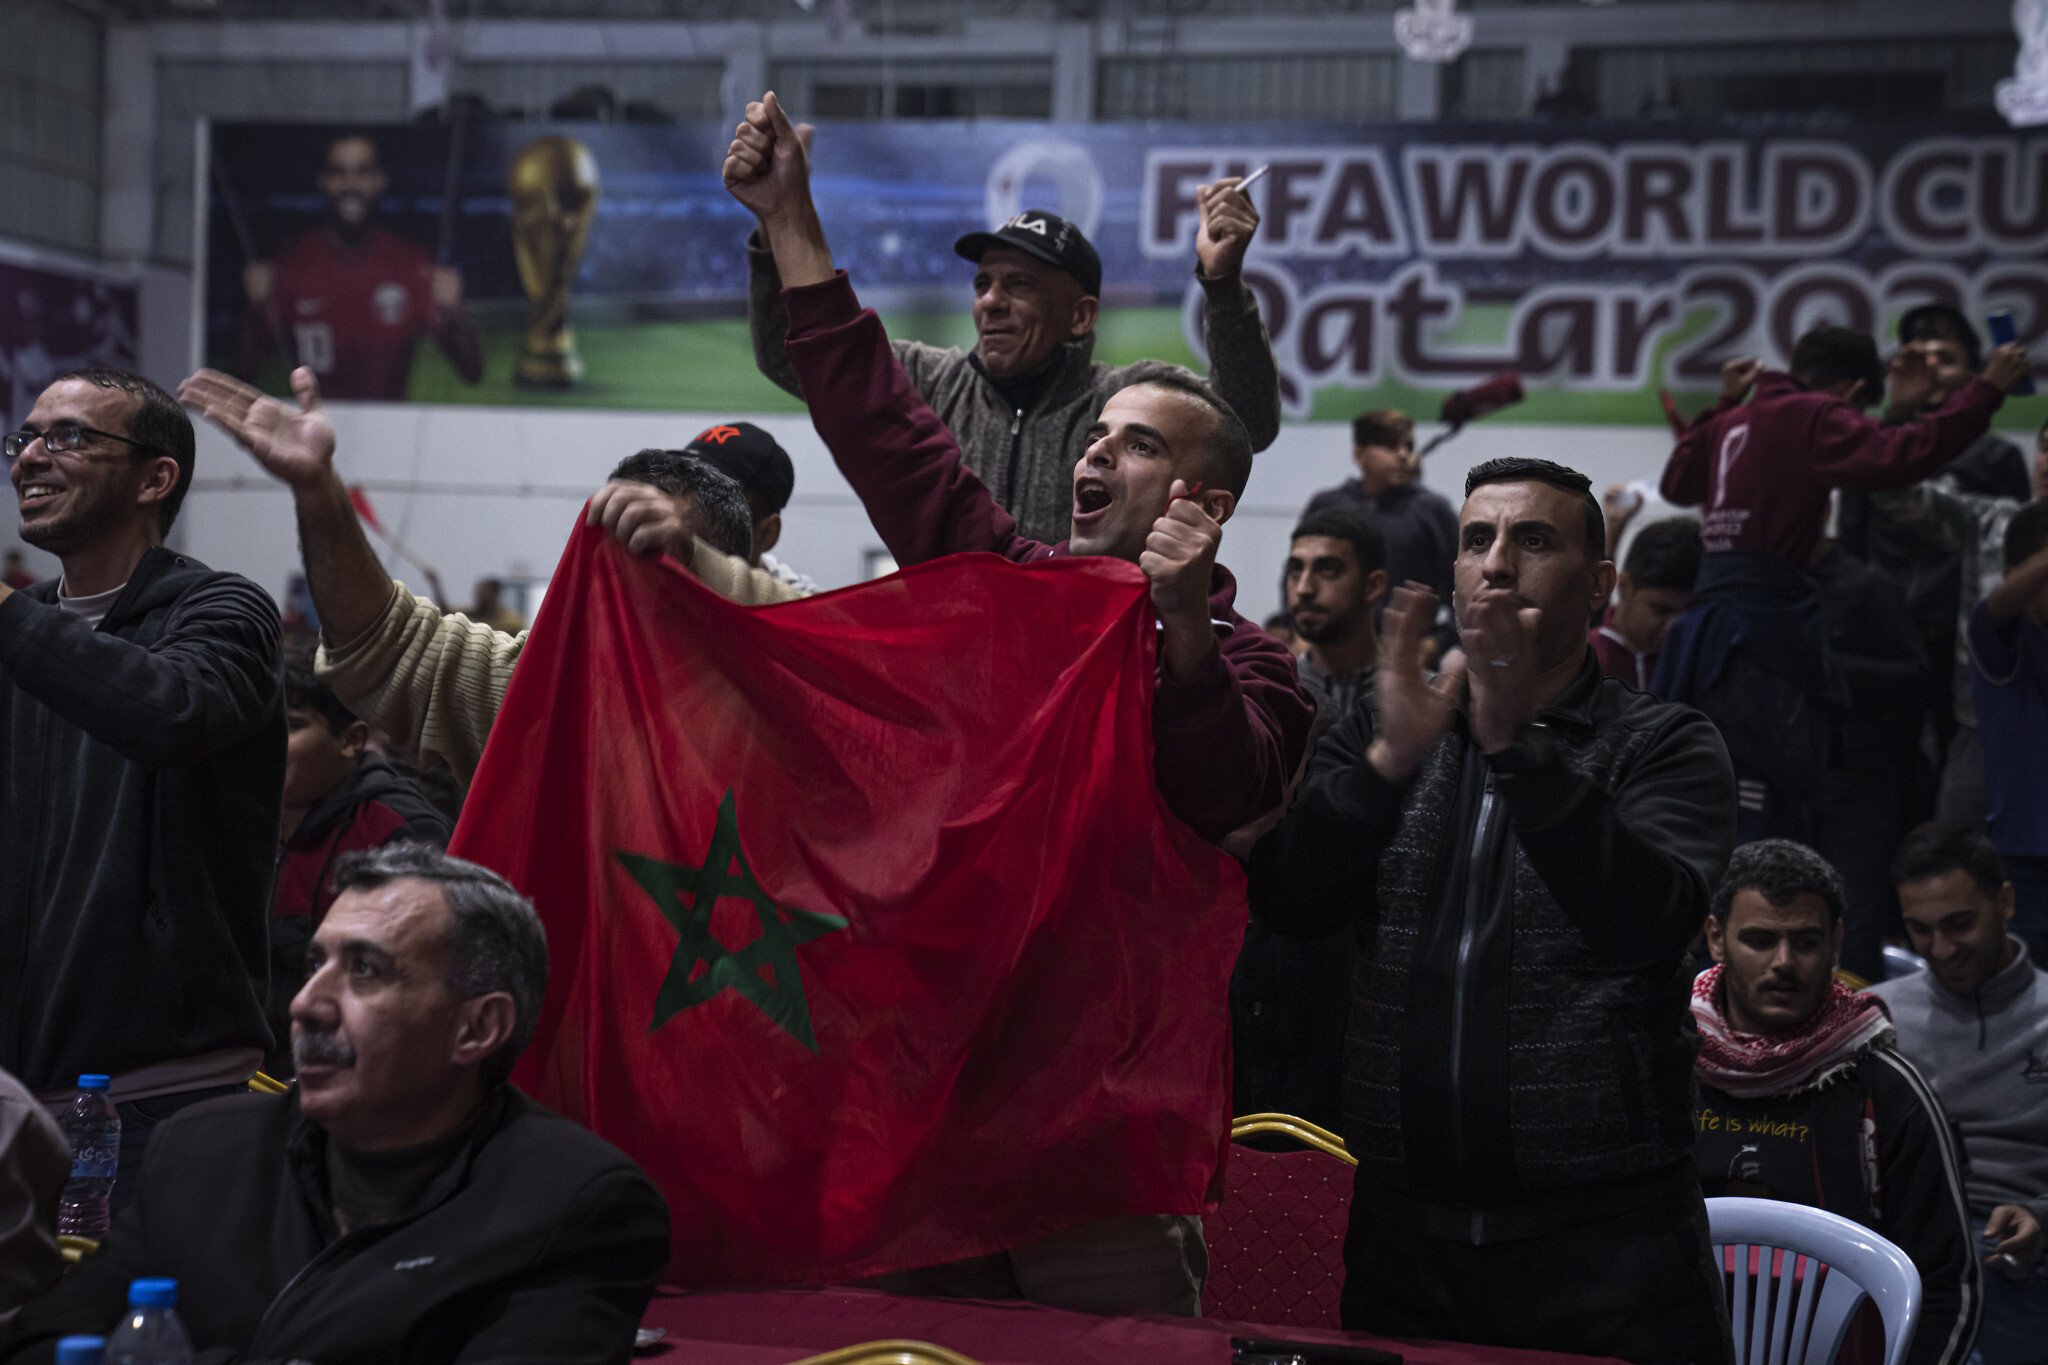 Moroccos World Cup finish is bittersweet for Arab fans The Times of Israel